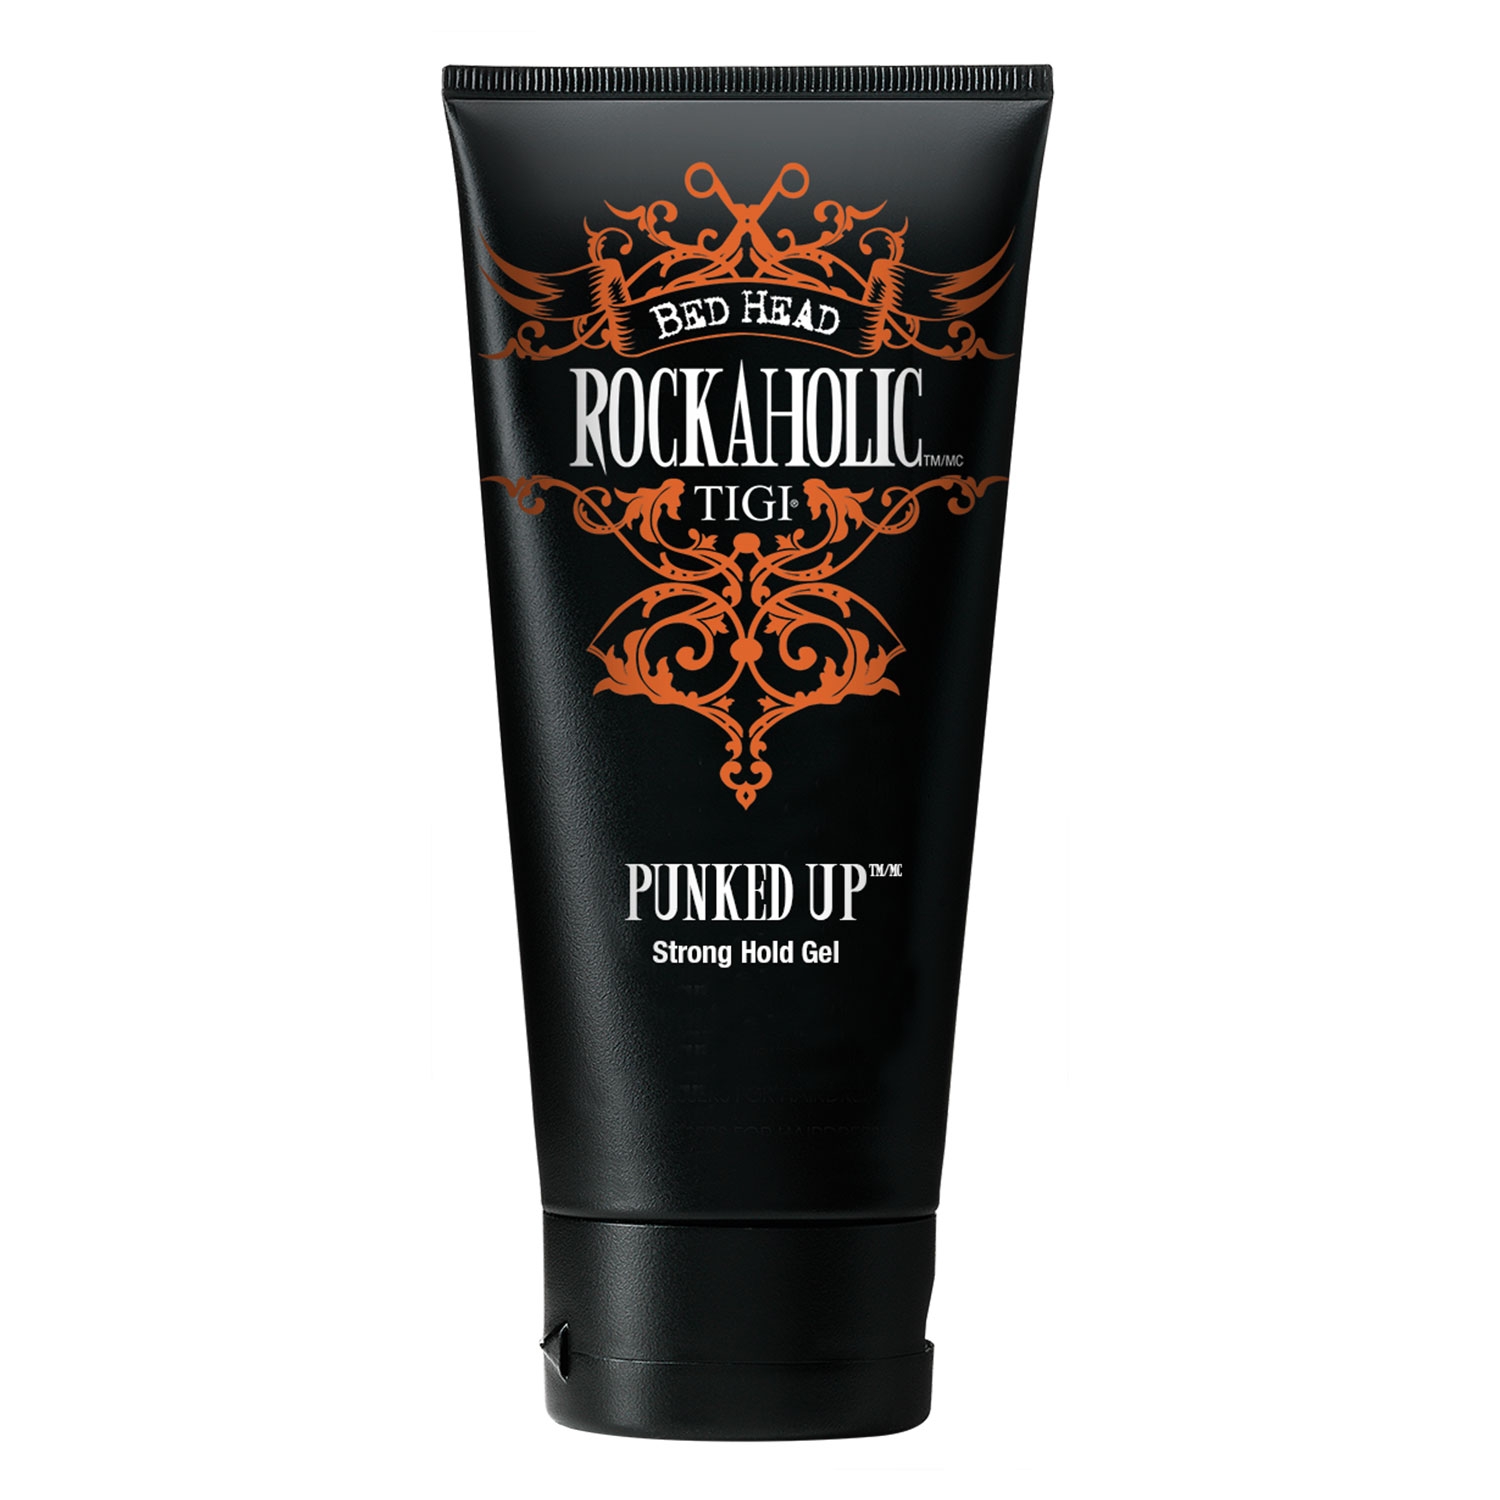 Product image from Bed Head Rockaholic - Punked Up Strong Hold Gel